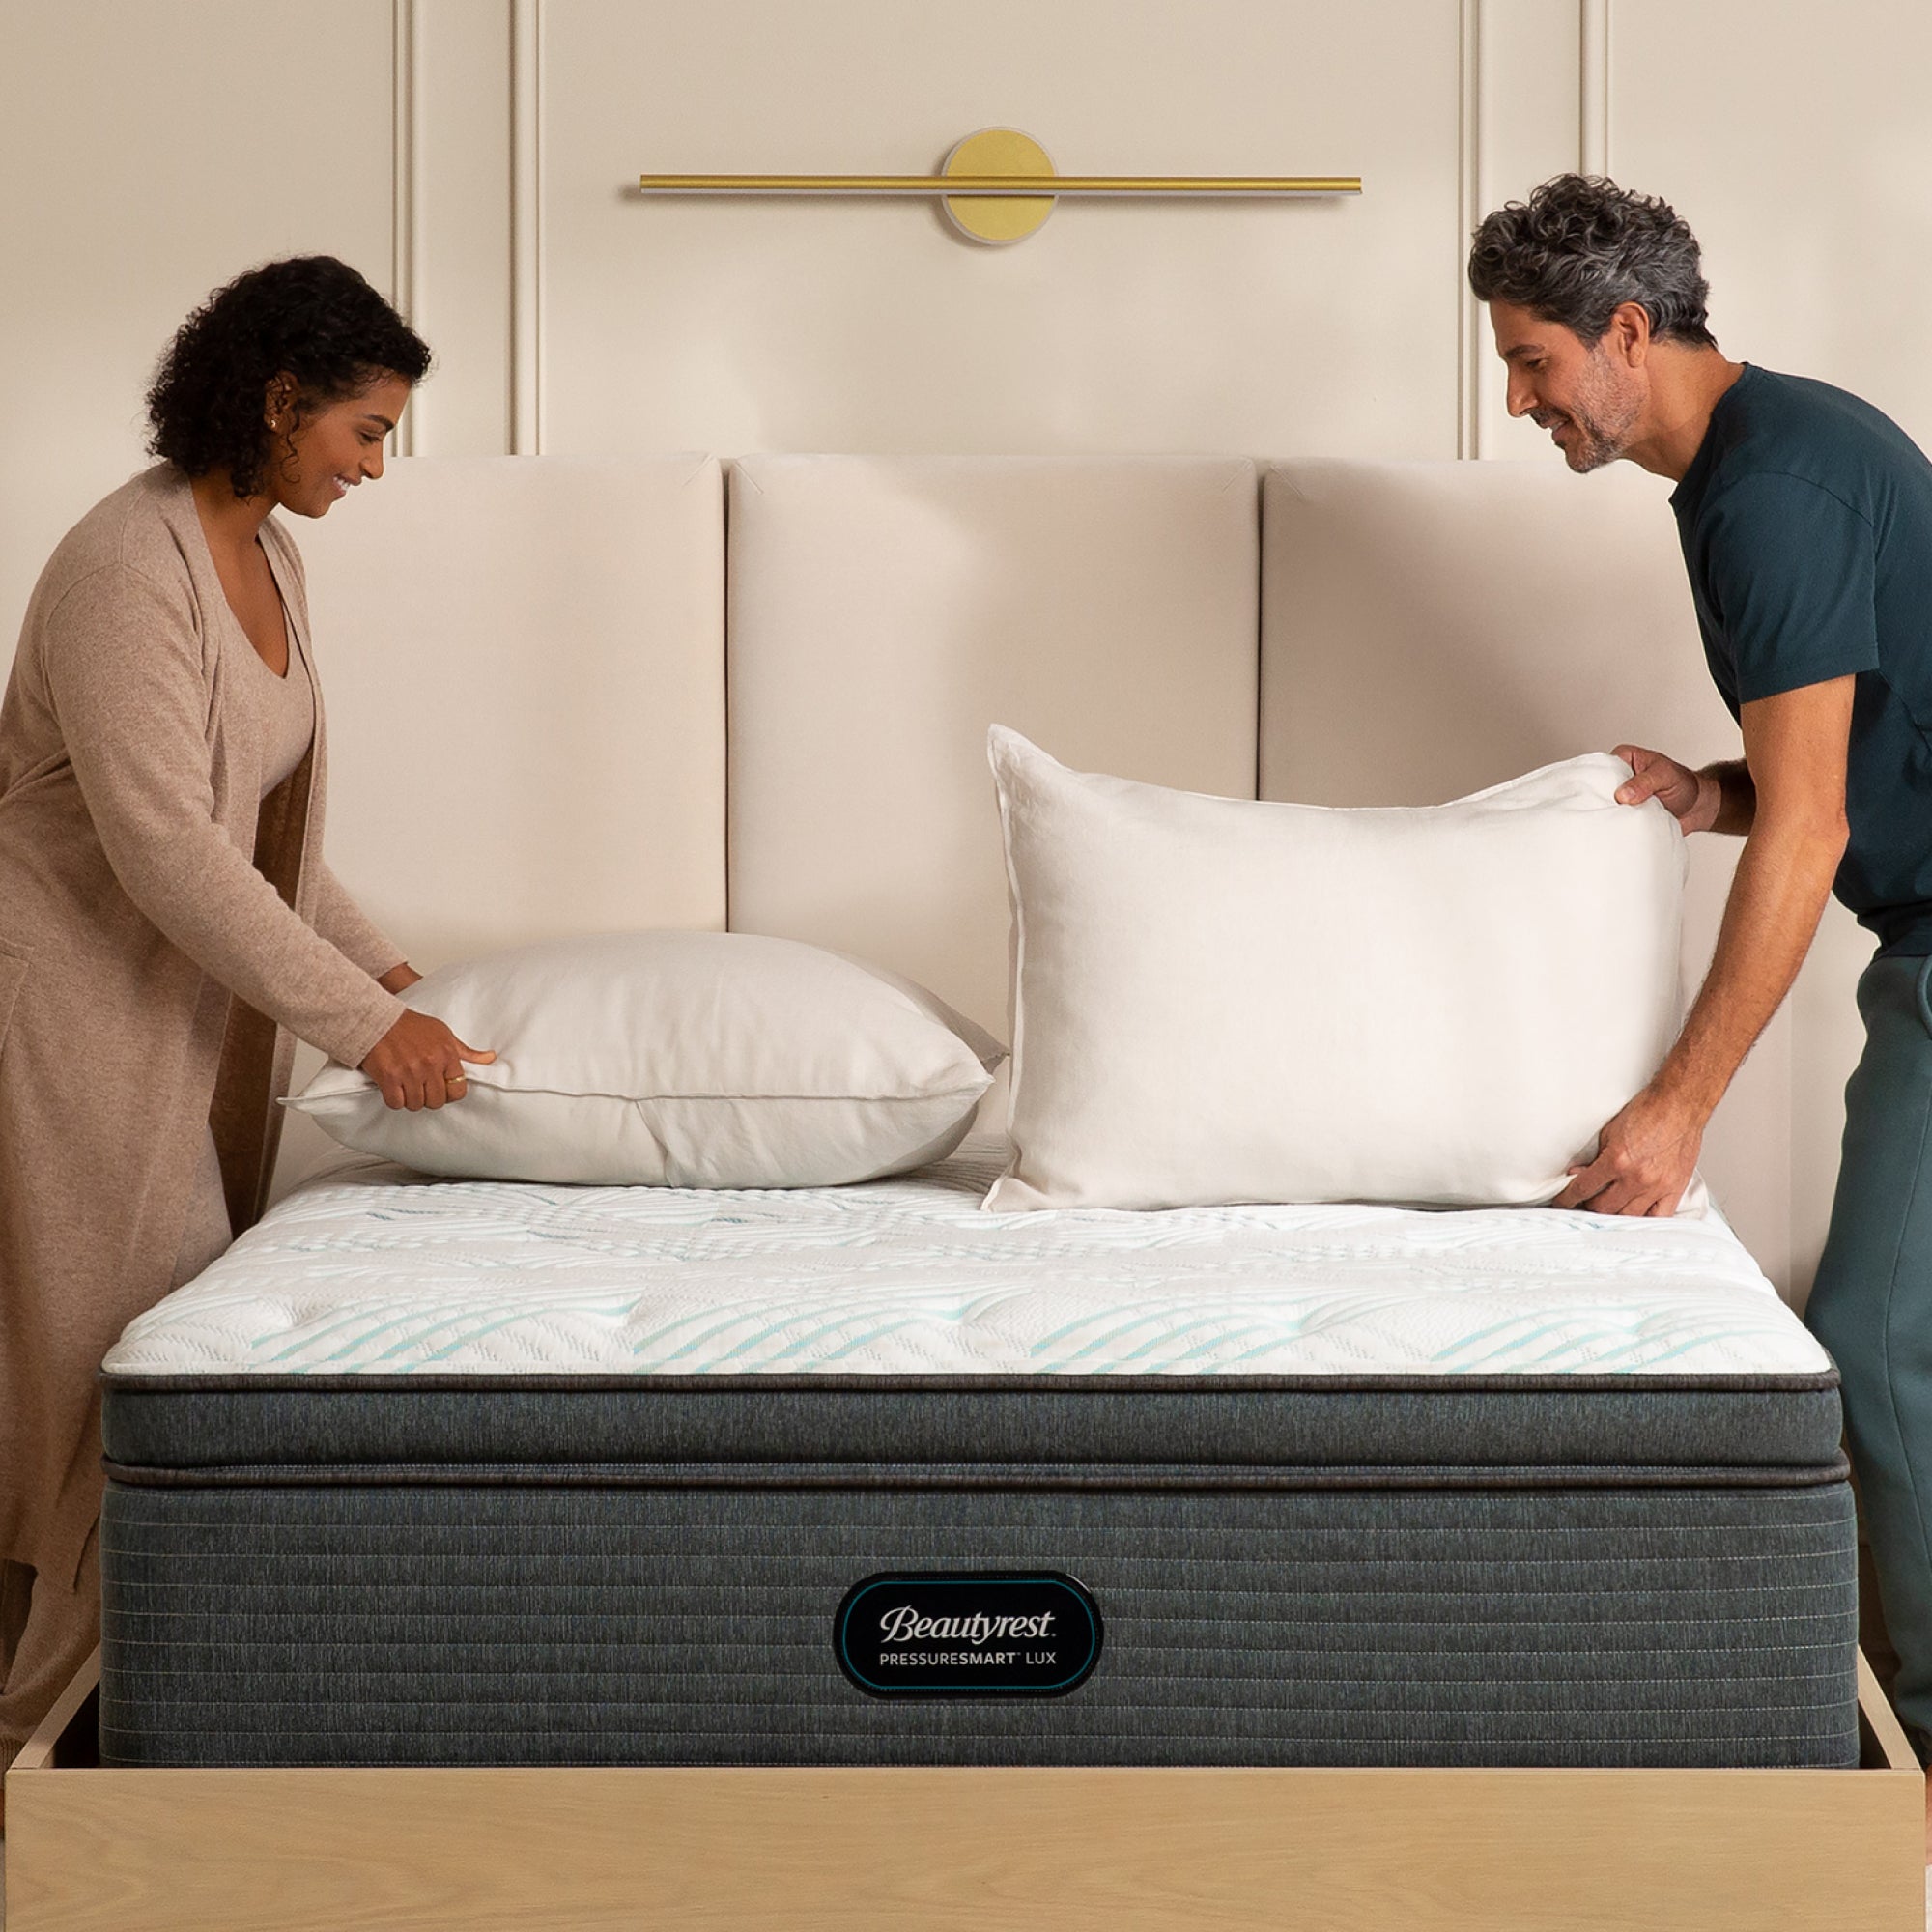 Man and woman making the bed for a Beautyrest PressureSmart mattress||feel: plush pillow top||series: lux